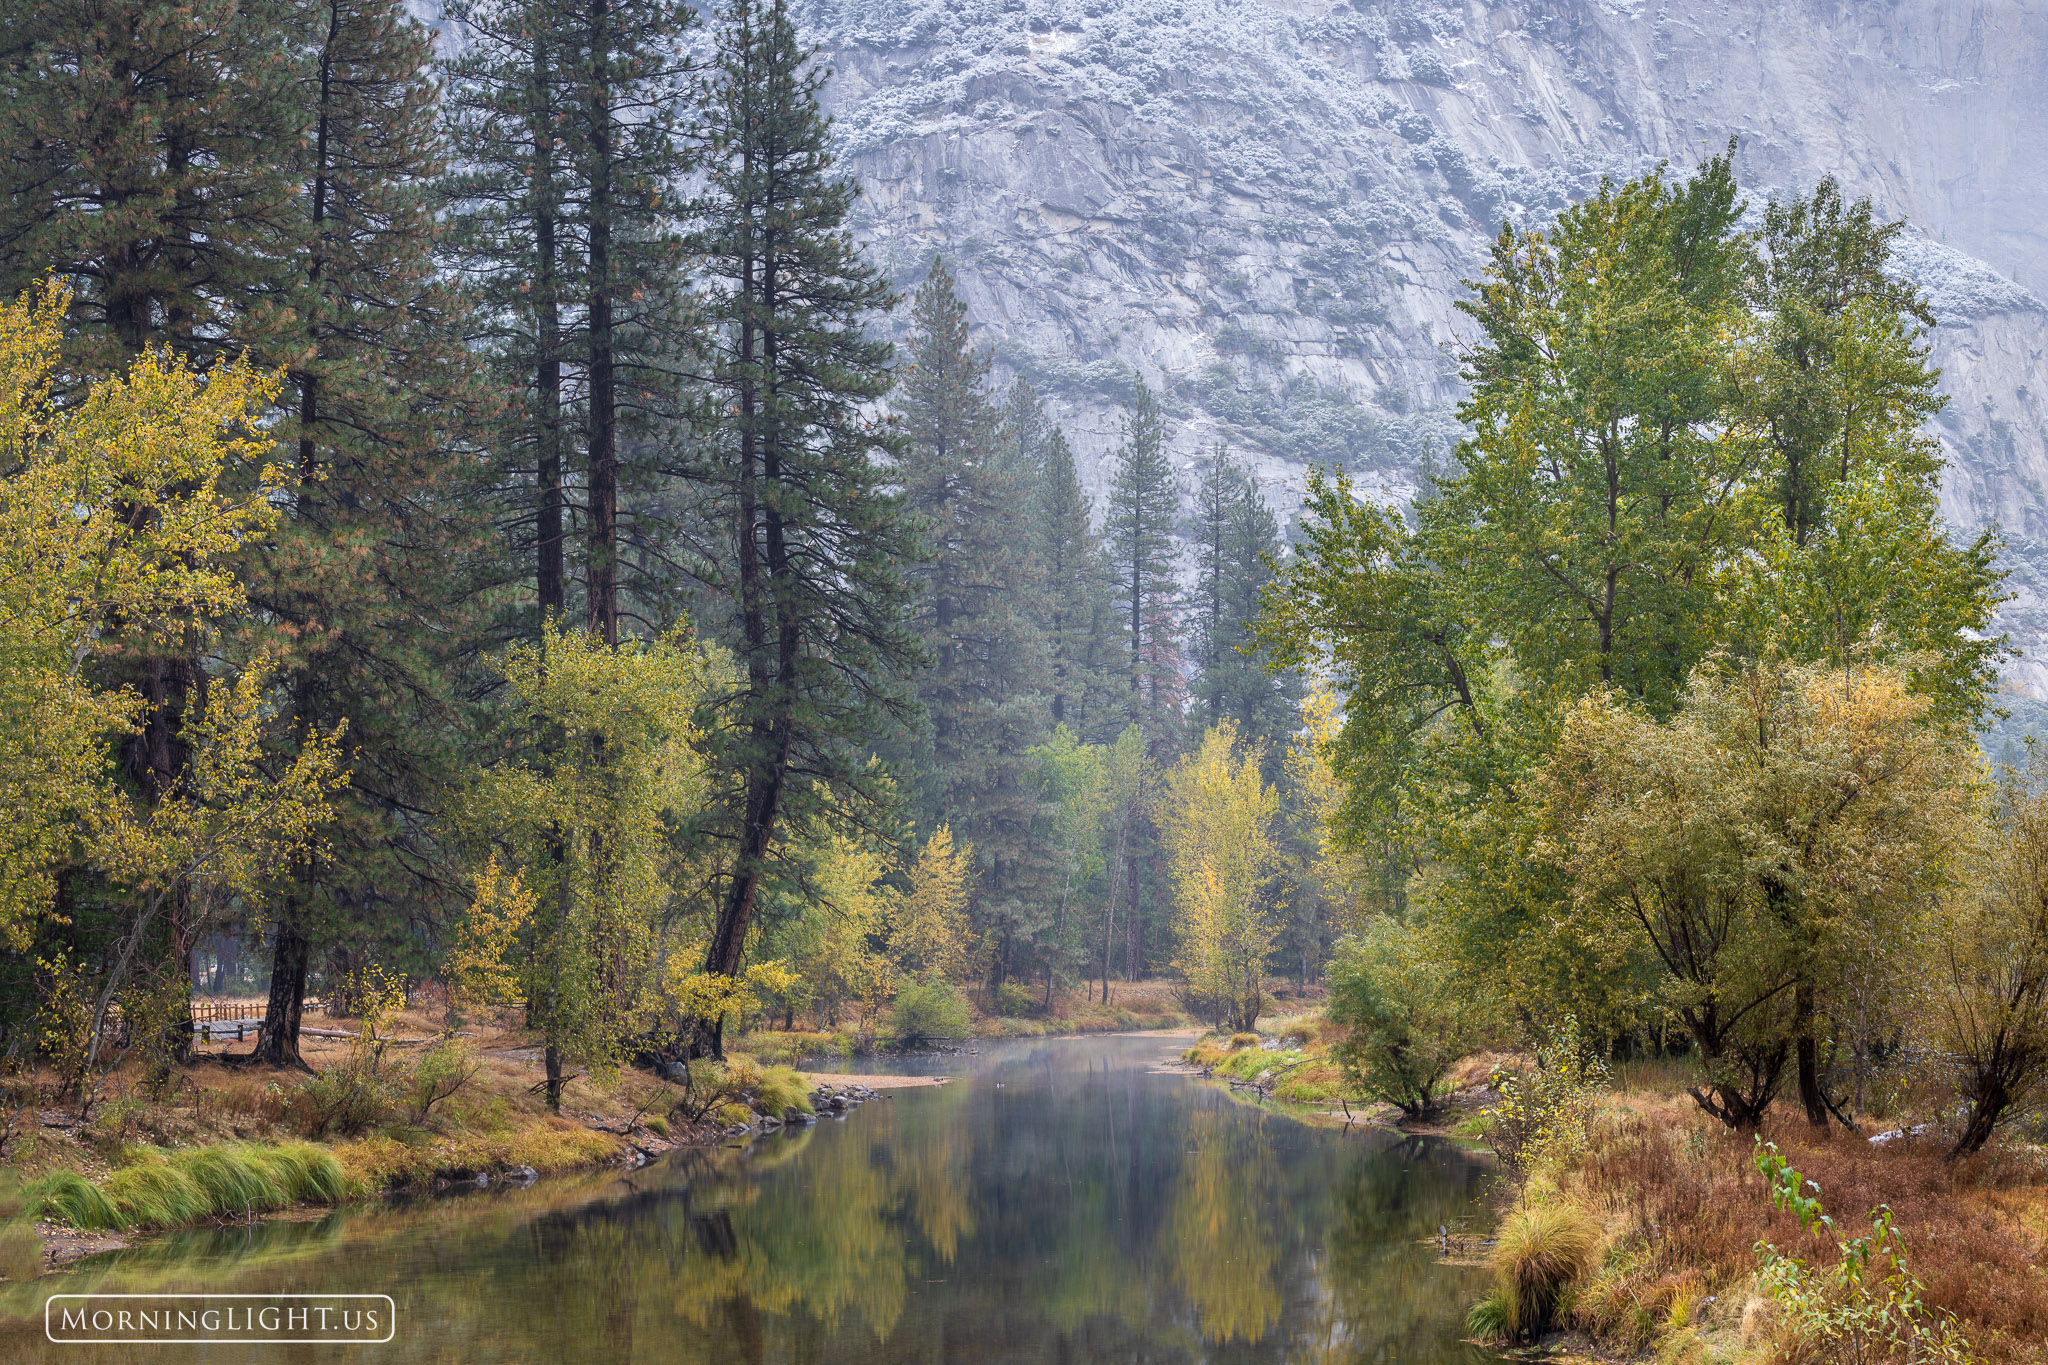 On a quiet autumn morning the Merced River which runs through the middle of Yosemite Valley quietly made its way through a world...